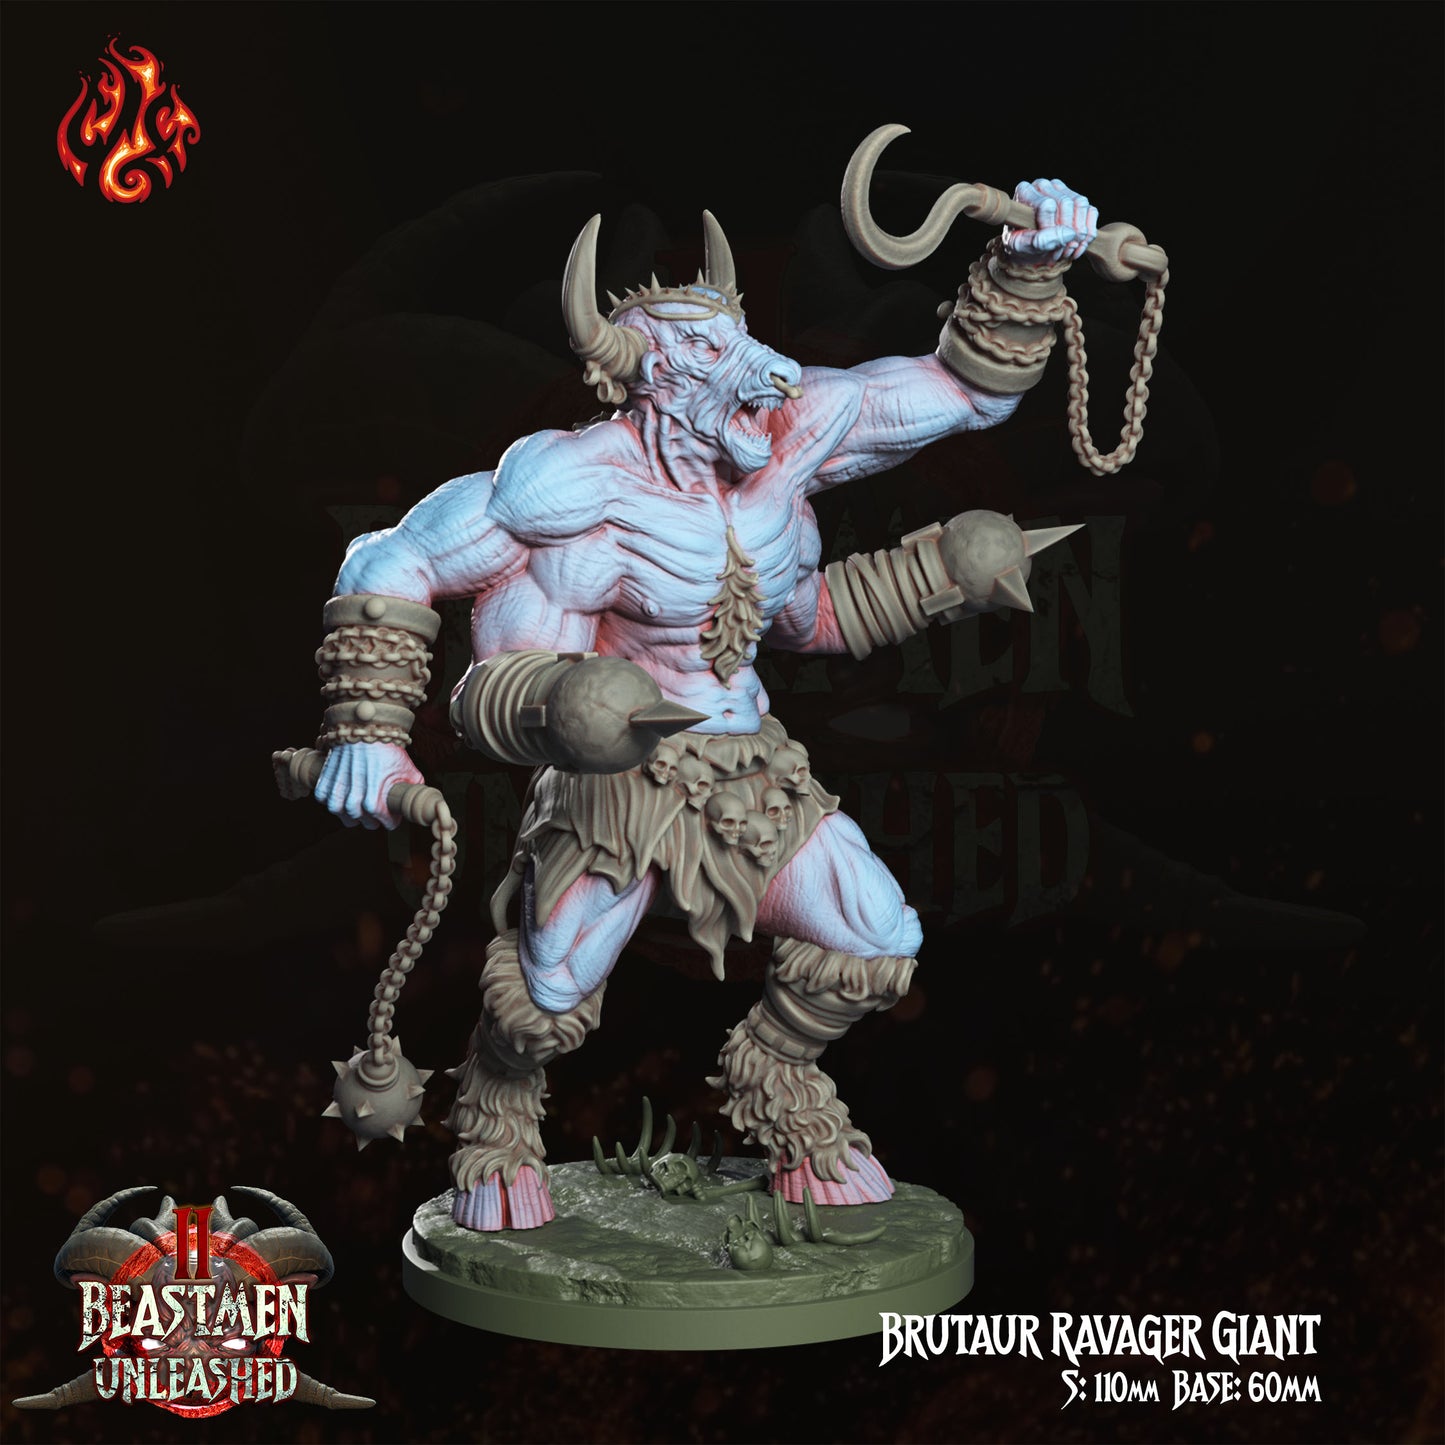 Brutaur Ravager Giant - Beastmen Unleashed - from Crippled God Foundry - Table-top gaming mini and collectable for painting.